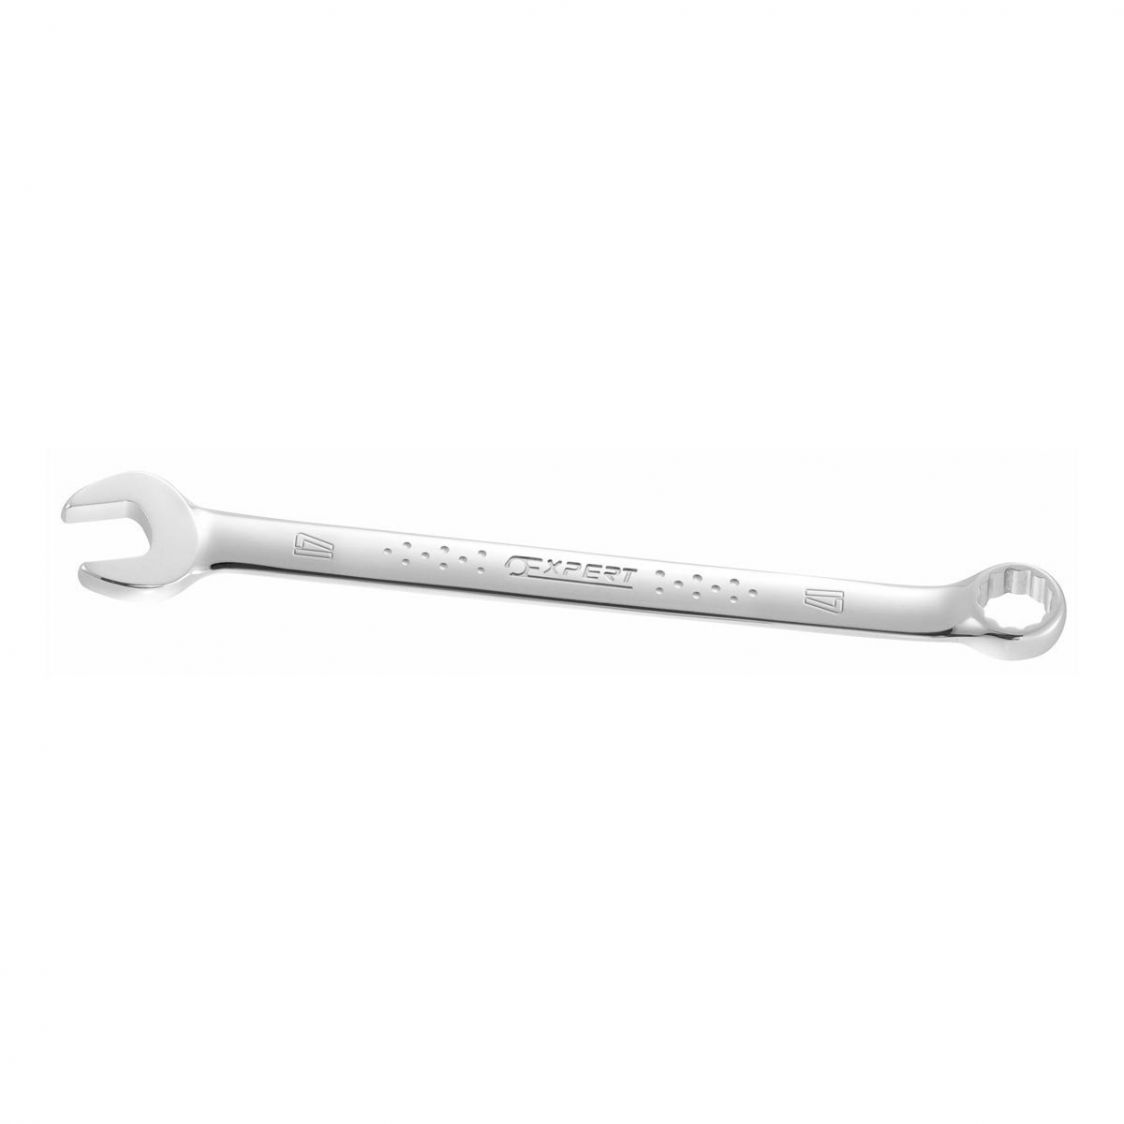 EXPERT by FACOM E110706 - 13mm Metric Long Combination Spanner